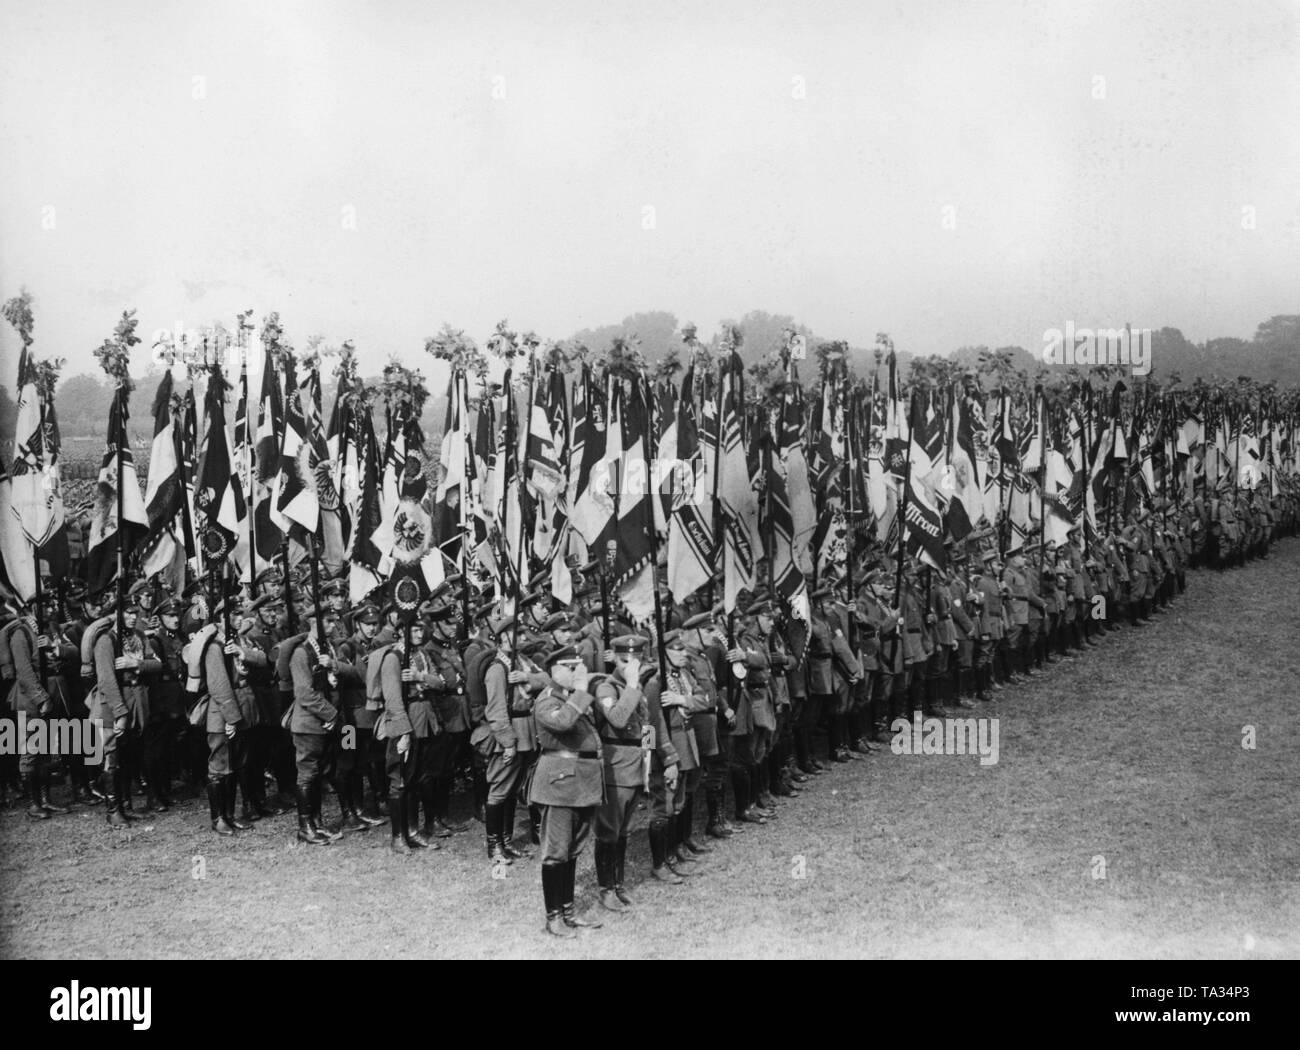 About 5000 flagbearers were deployed at a roll call of the Reichsfuehrer (federal leader) of the Stahlhelm at the Maschsee in Hanover. Stock Photo